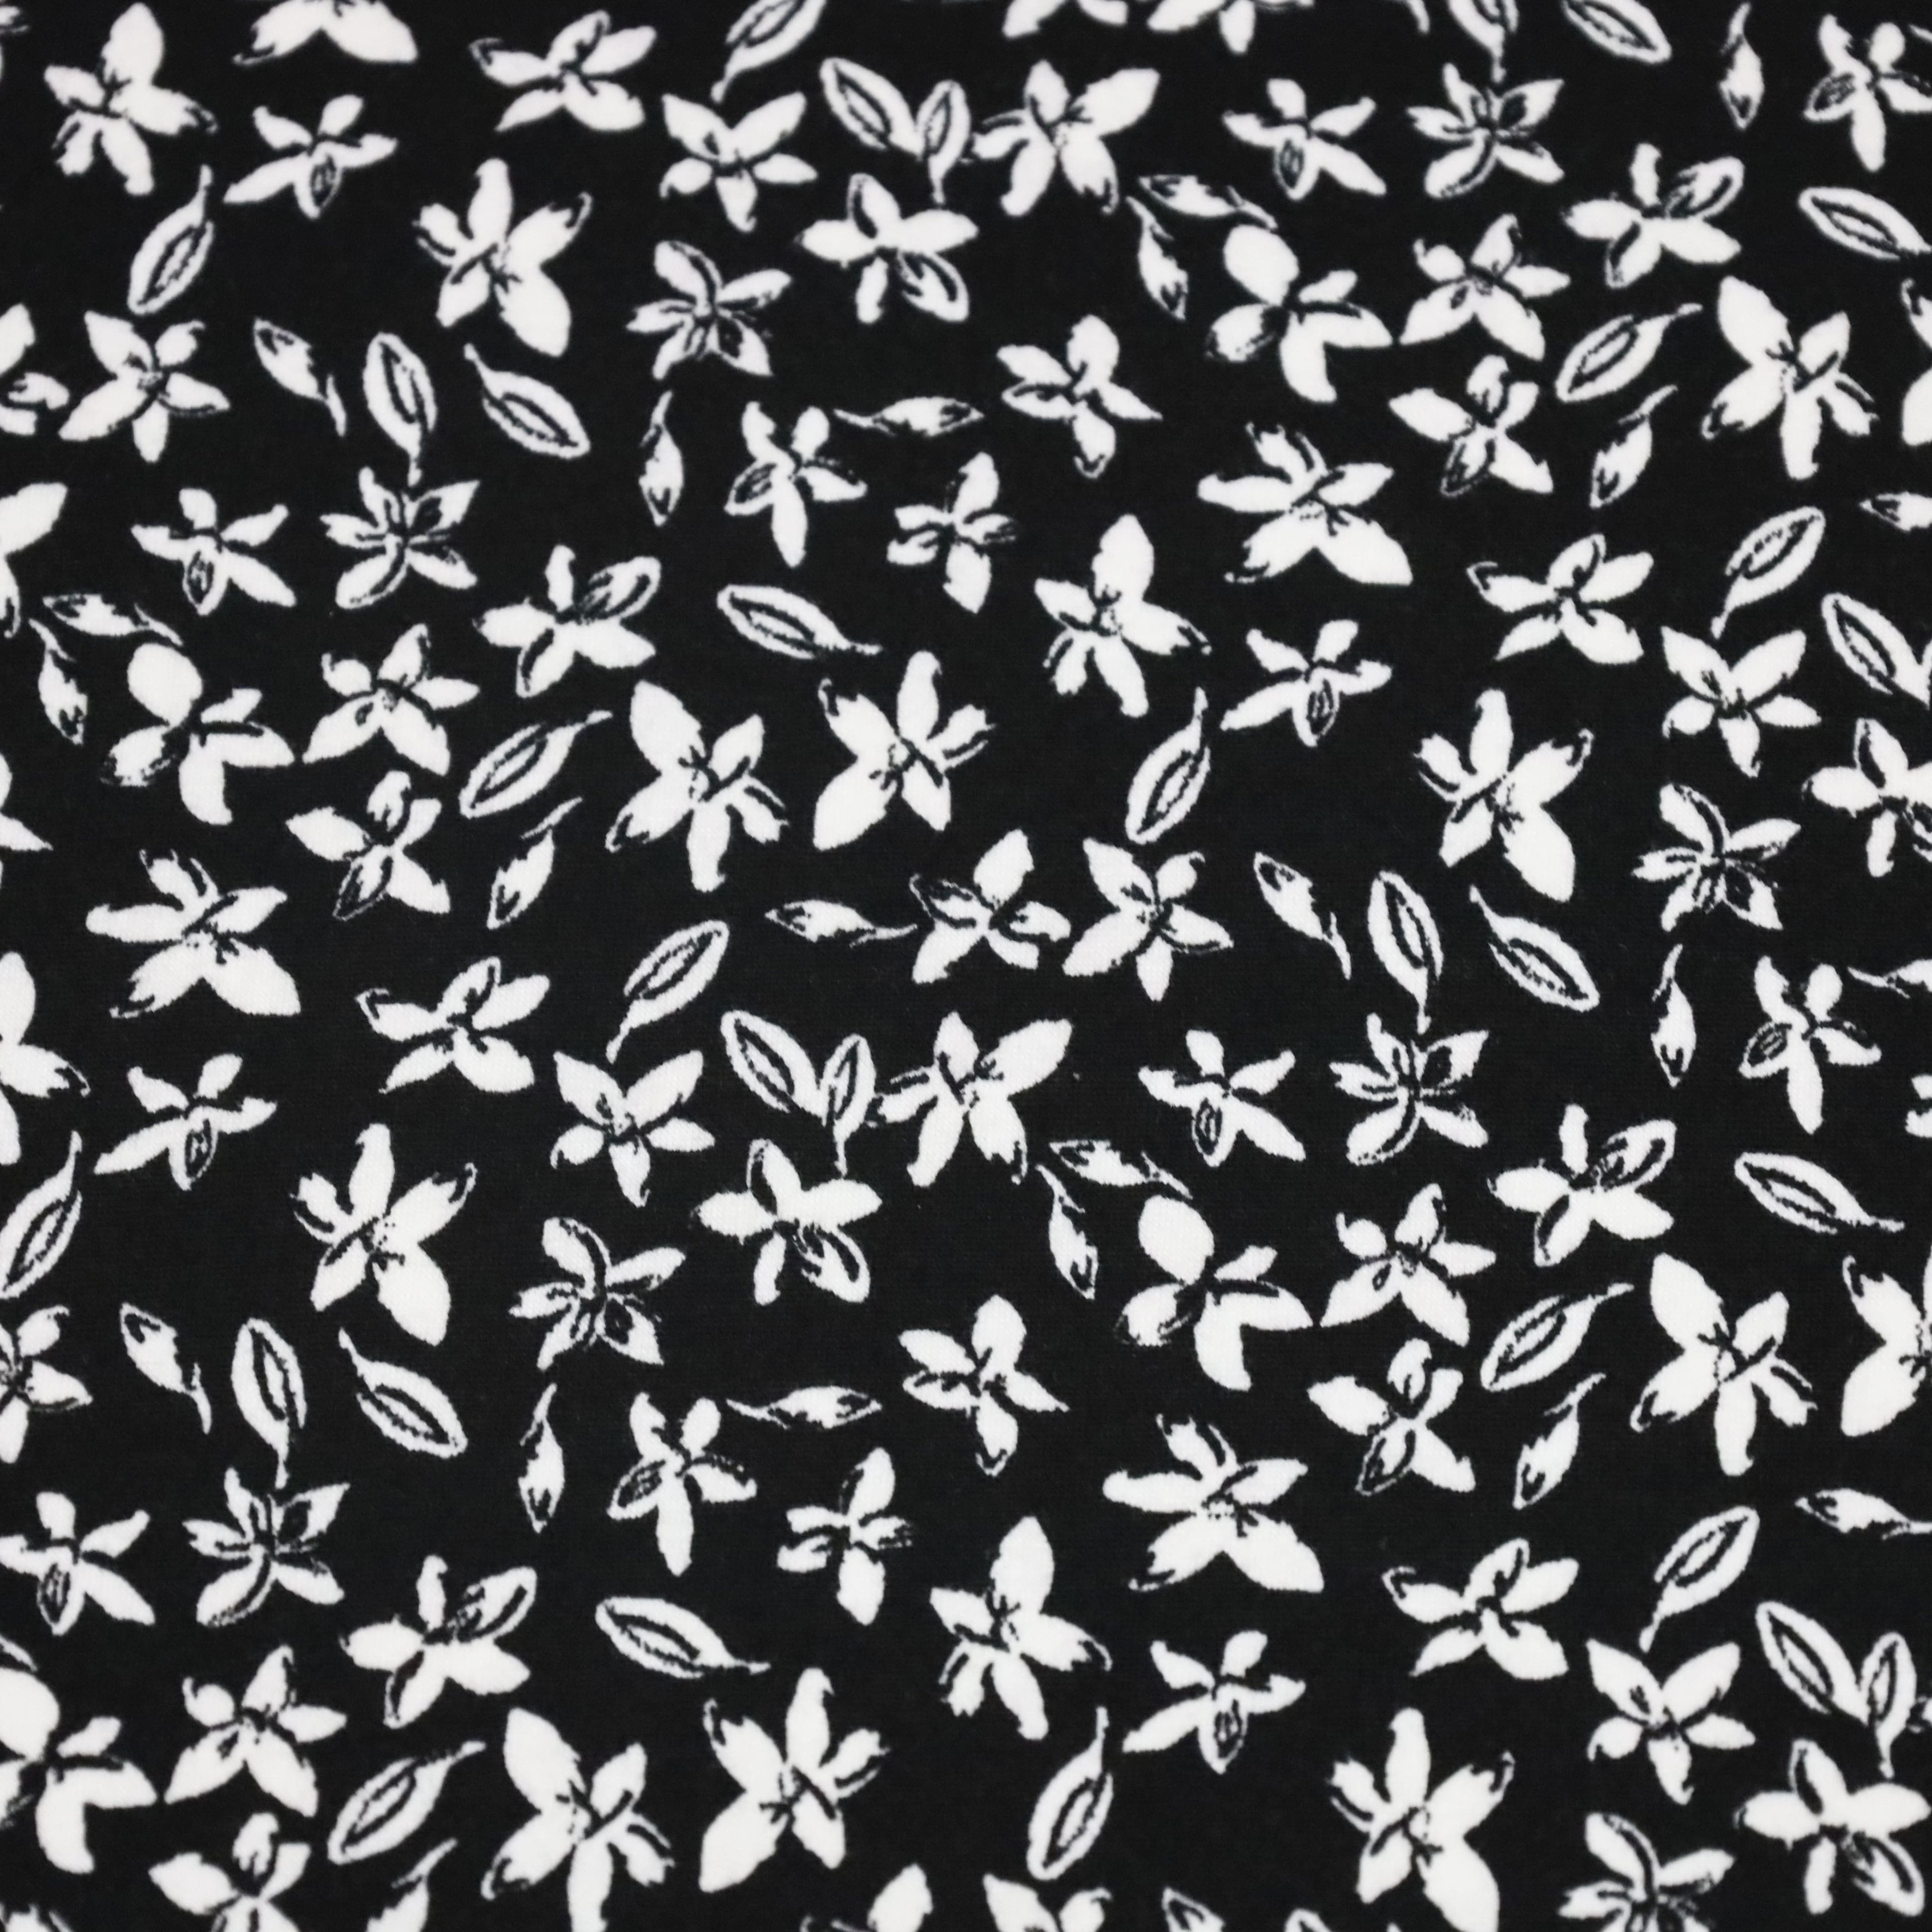 Fabric Merchants Leaves on Black Double Brushed Stretch Fabric